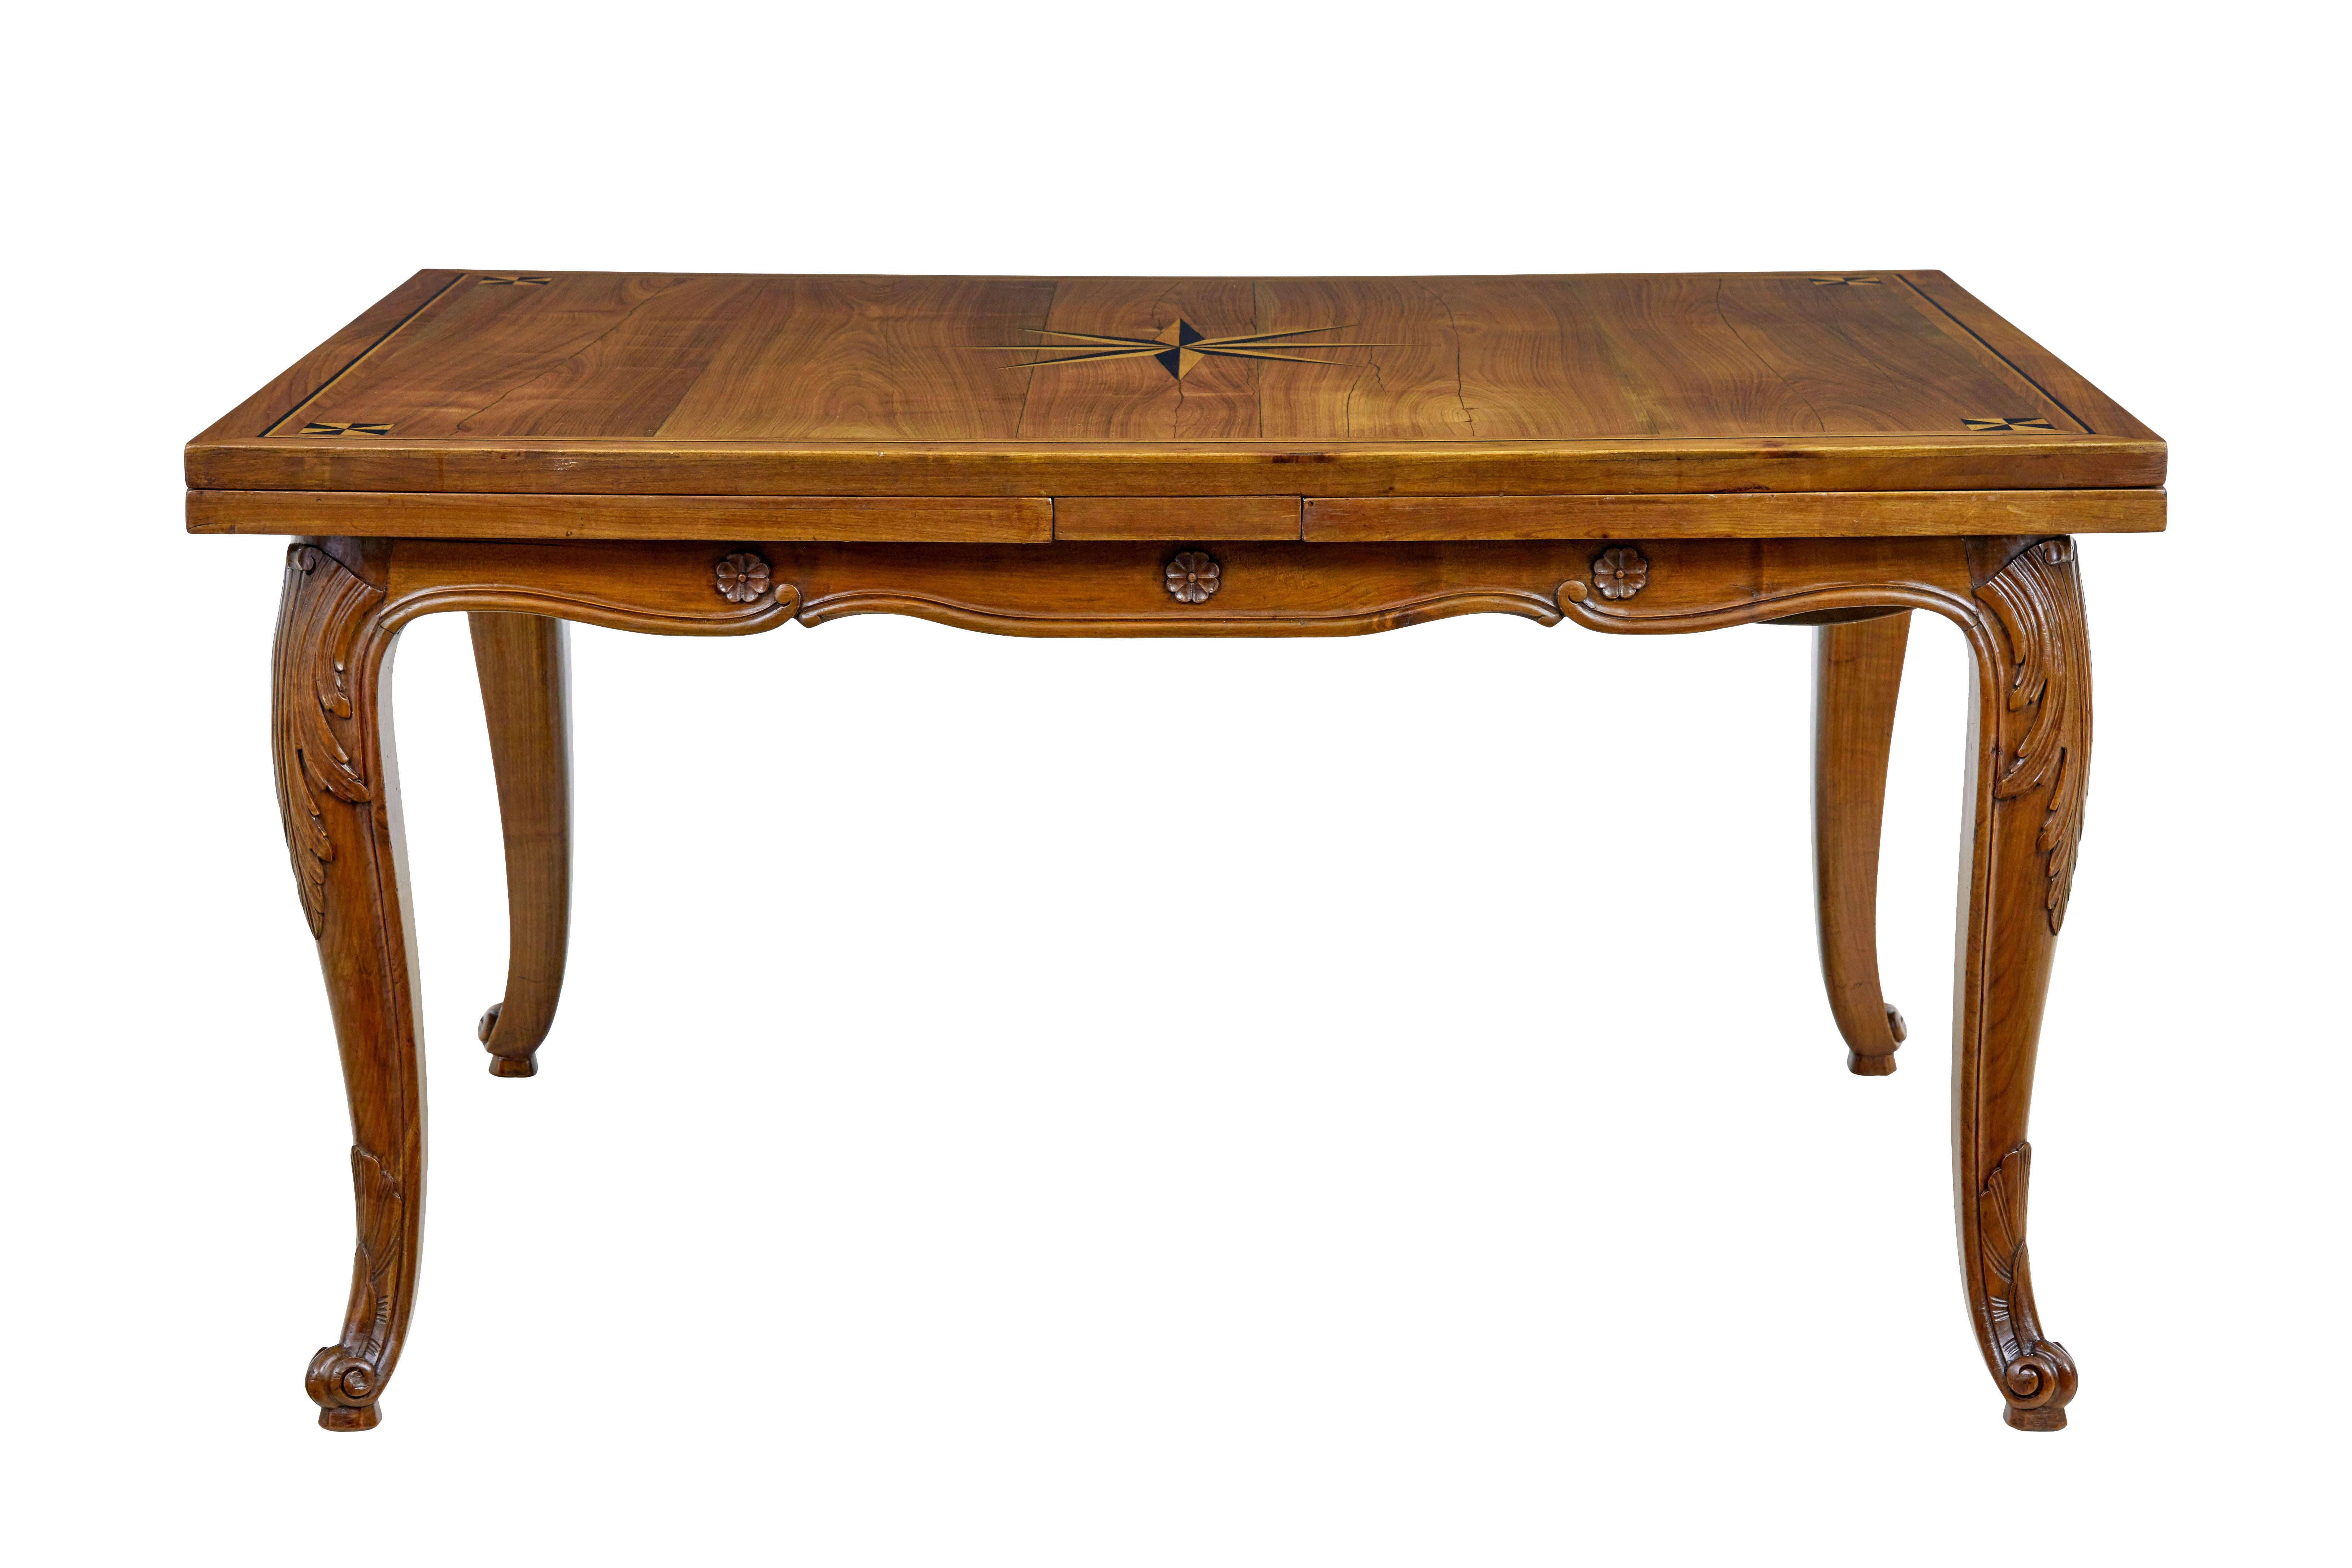 19th century french inlaid Fruitwood extending dining table circa 1880.

Fine quality french farmhouse draw leaf dining table.  Rectangular top with central inlaid star motif, complemented by further designs in each corner and border in the same